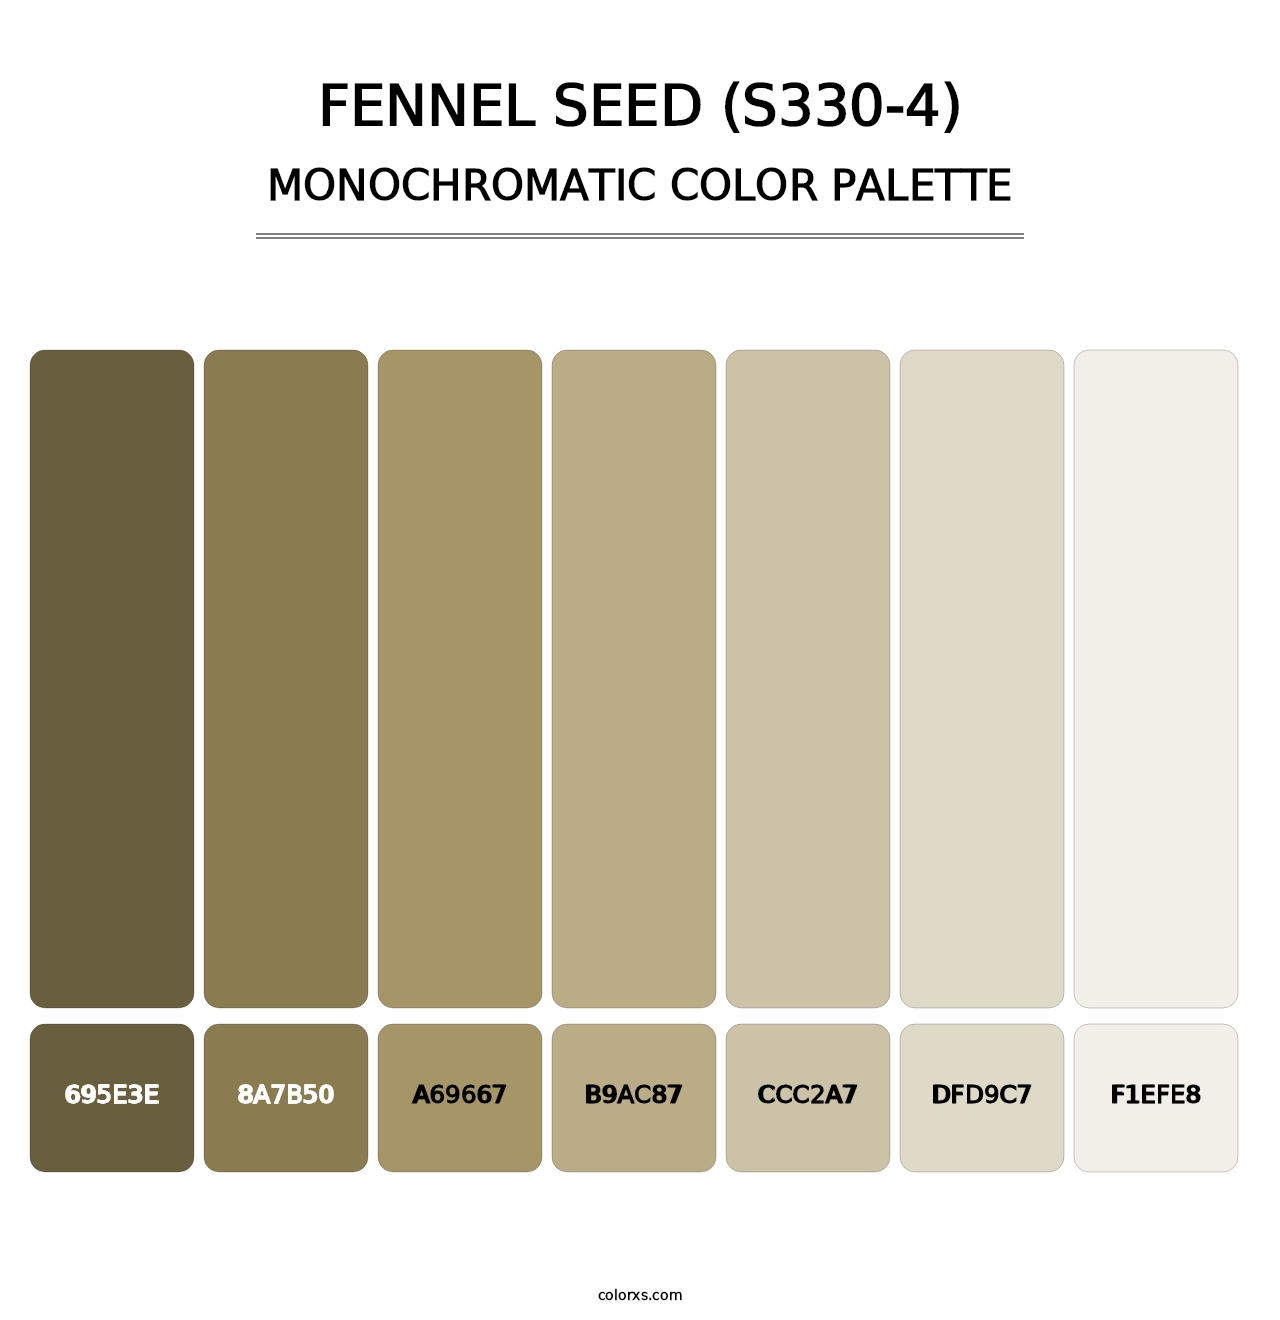 Fennel Seed (S330-4) - Monochromatic Color Palette